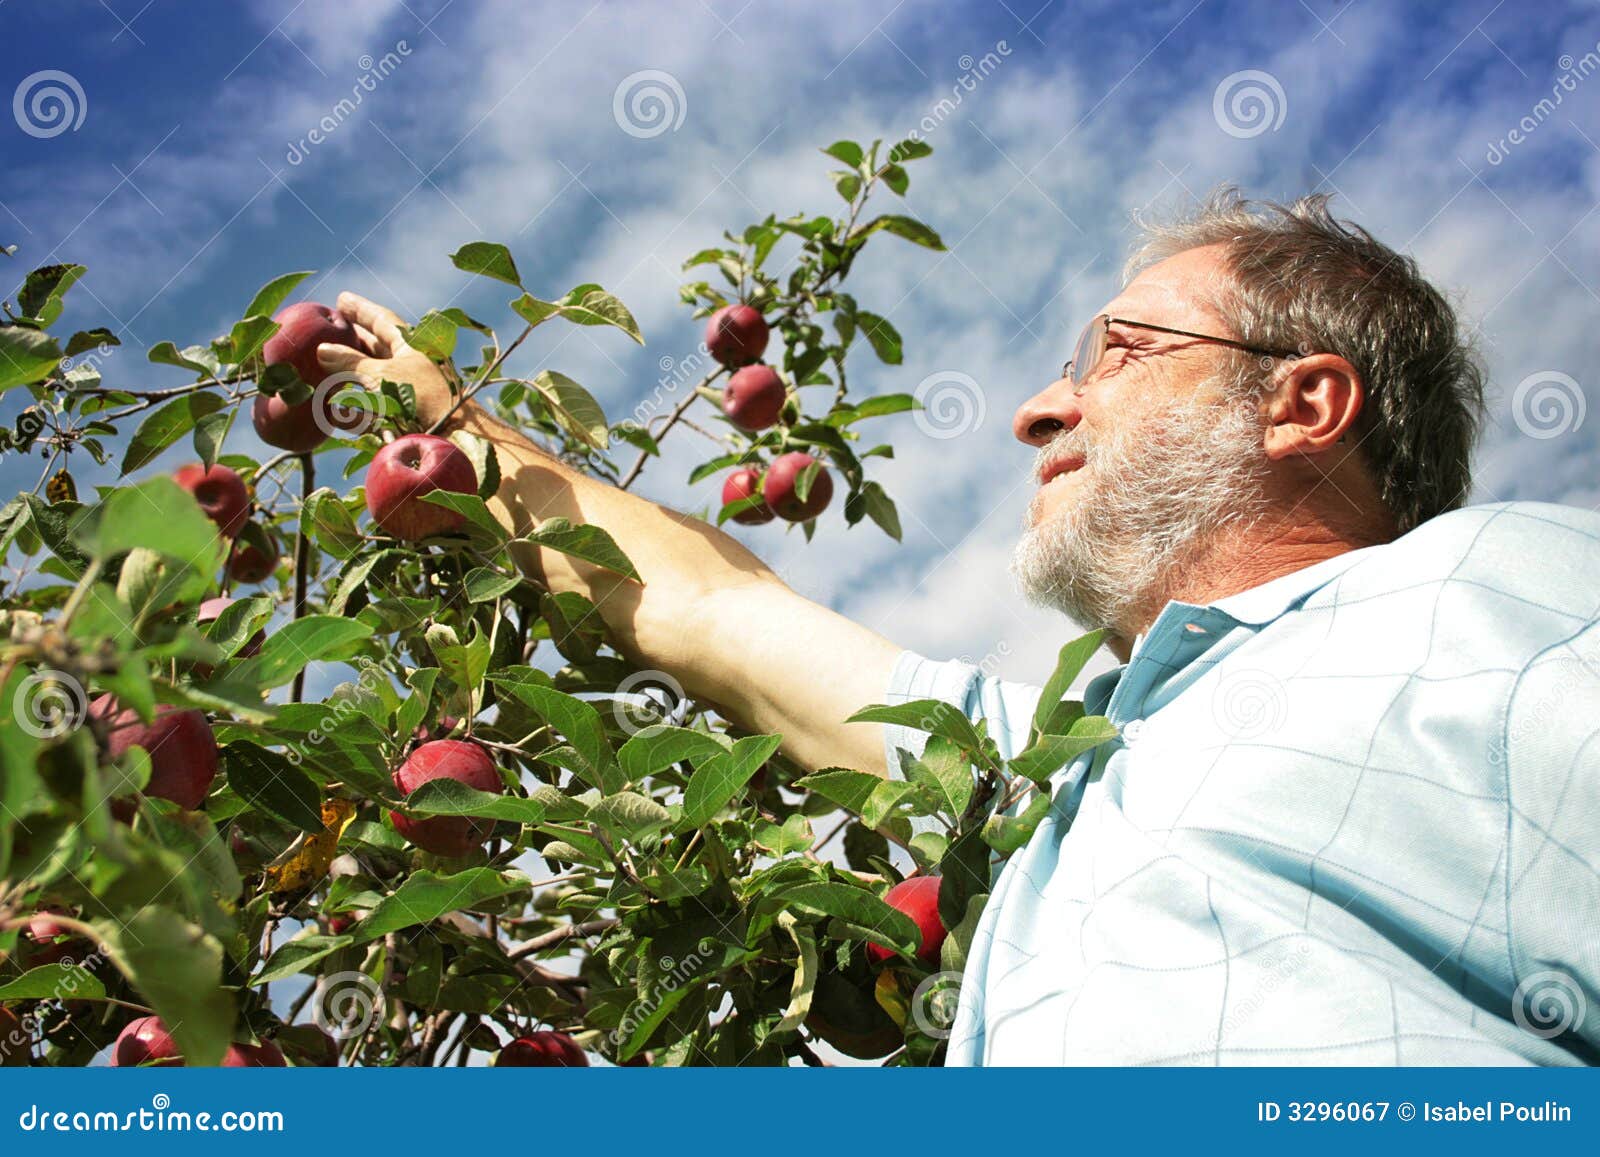 man picking apple in orchard